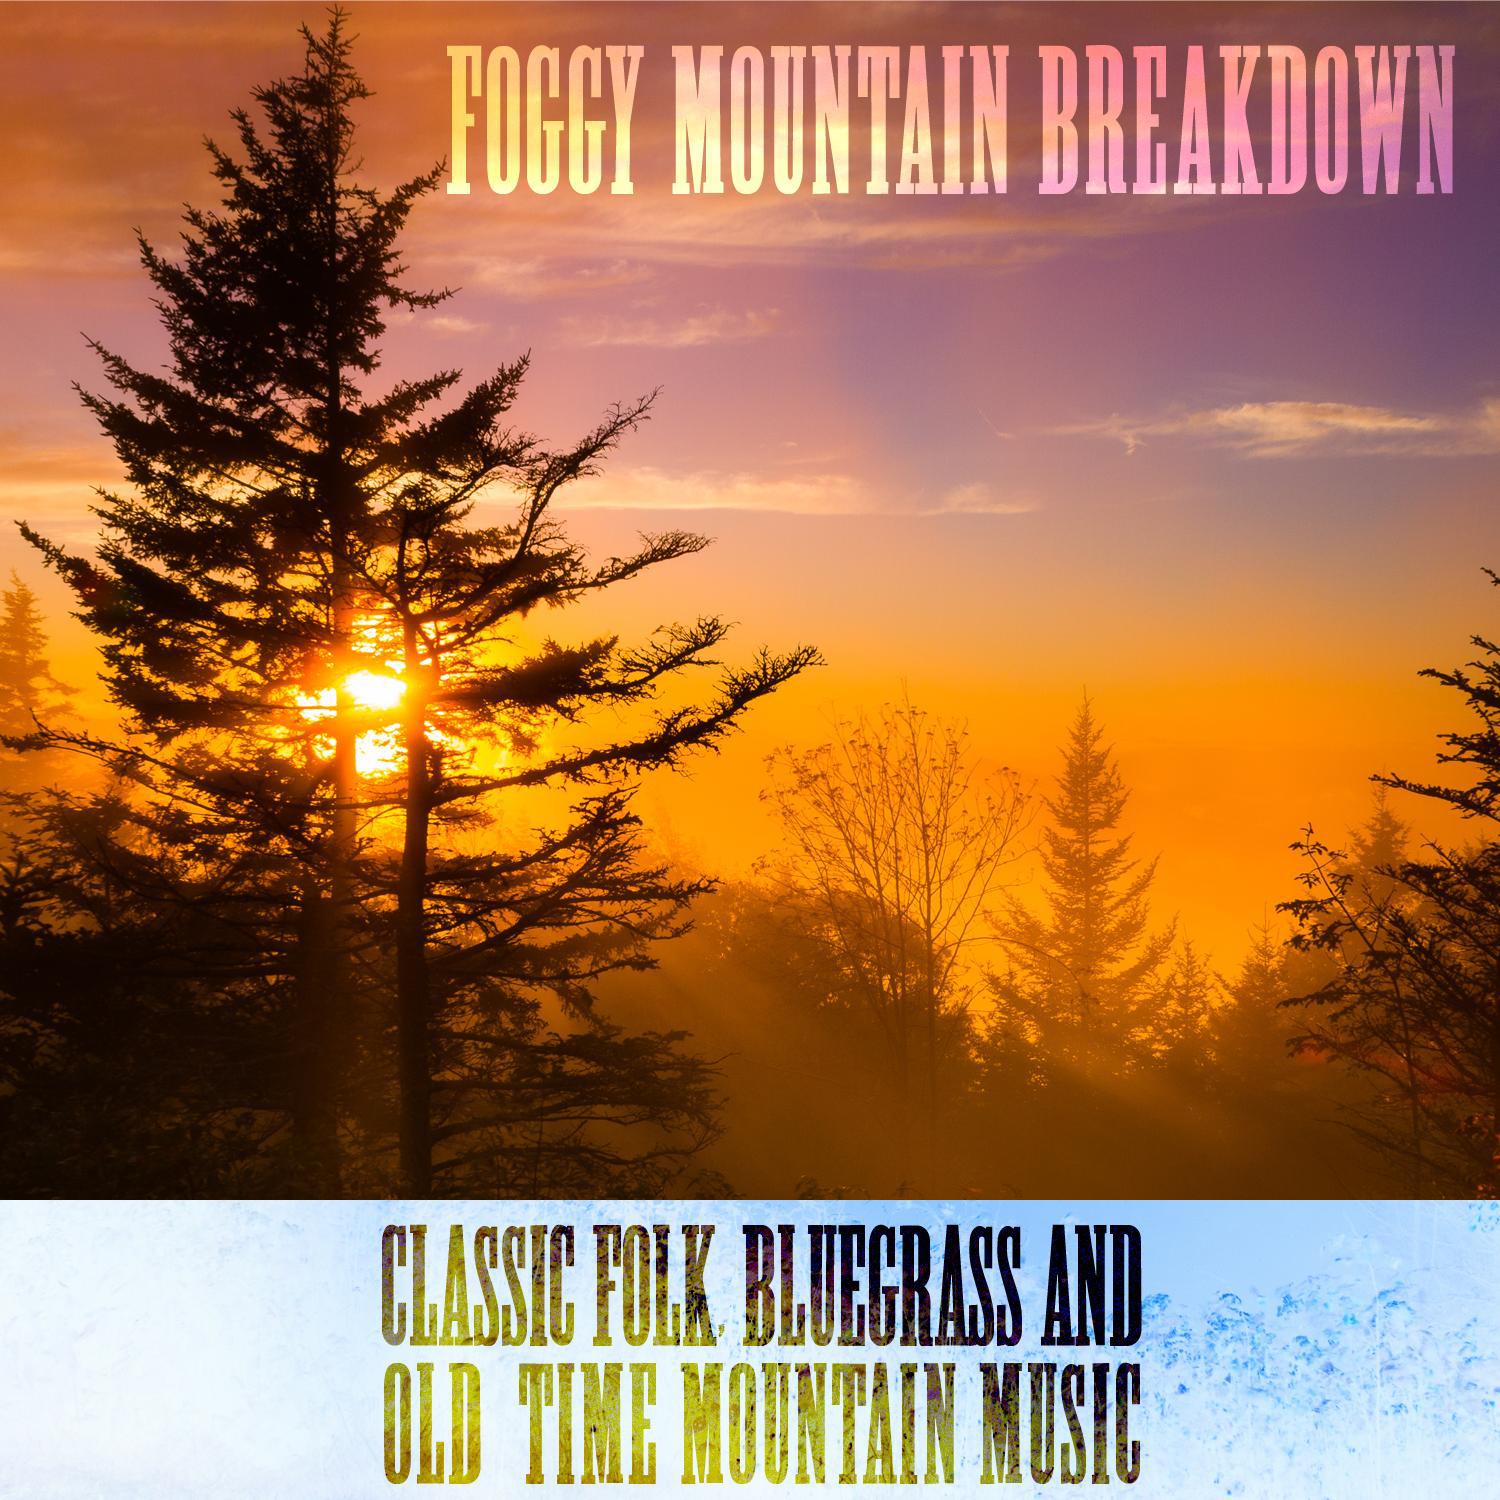 Foggy Mountain Breakdown: Classic Folk, Bluegrass, And Old-Time Mountain Music